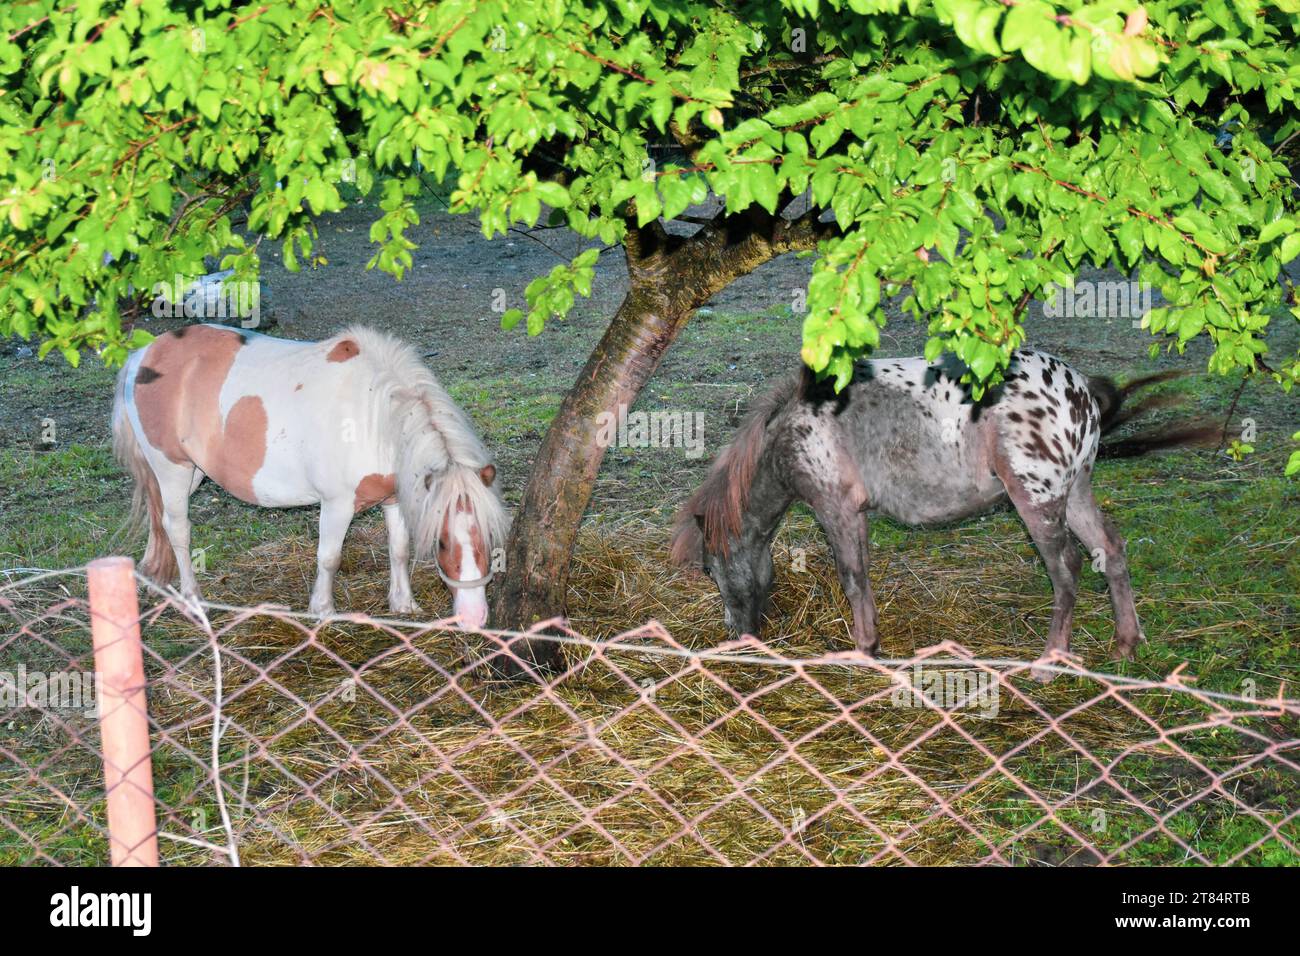 Two horses, ponies. In a fenced property, horses graze hay around a beautiful, low, lush tree Stock Photo